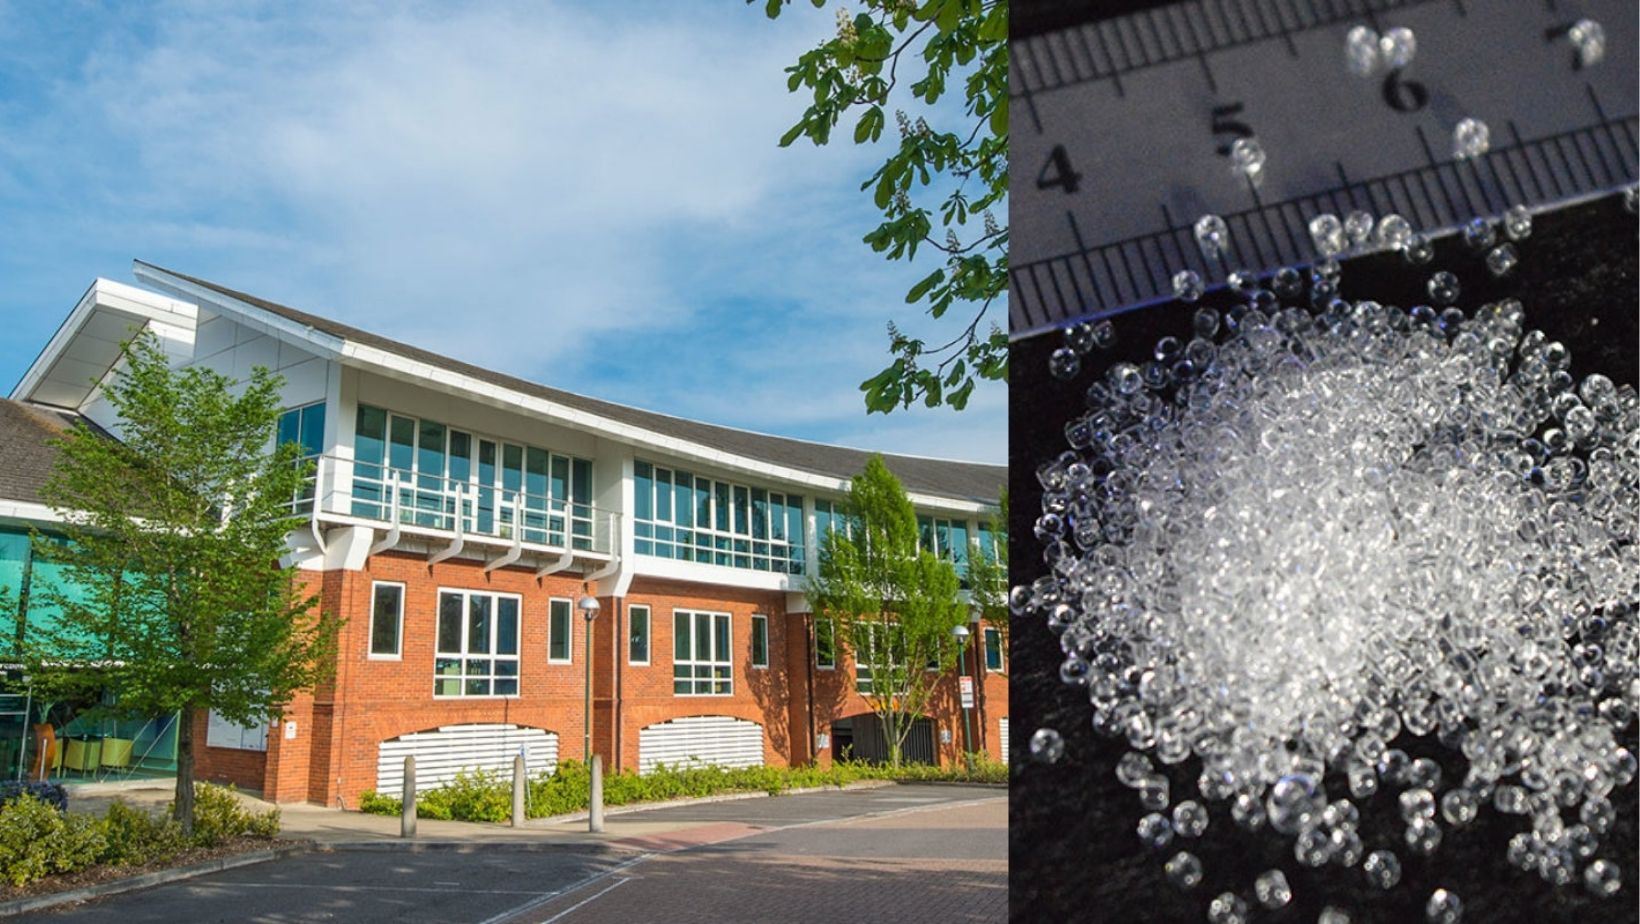 Left: Surrey Research Park building where I work (source: https://surrey-research-park.com/)
Right: a close up of the micro-silica beads I work with (source: https://www.trueinvivo.co.uk/)